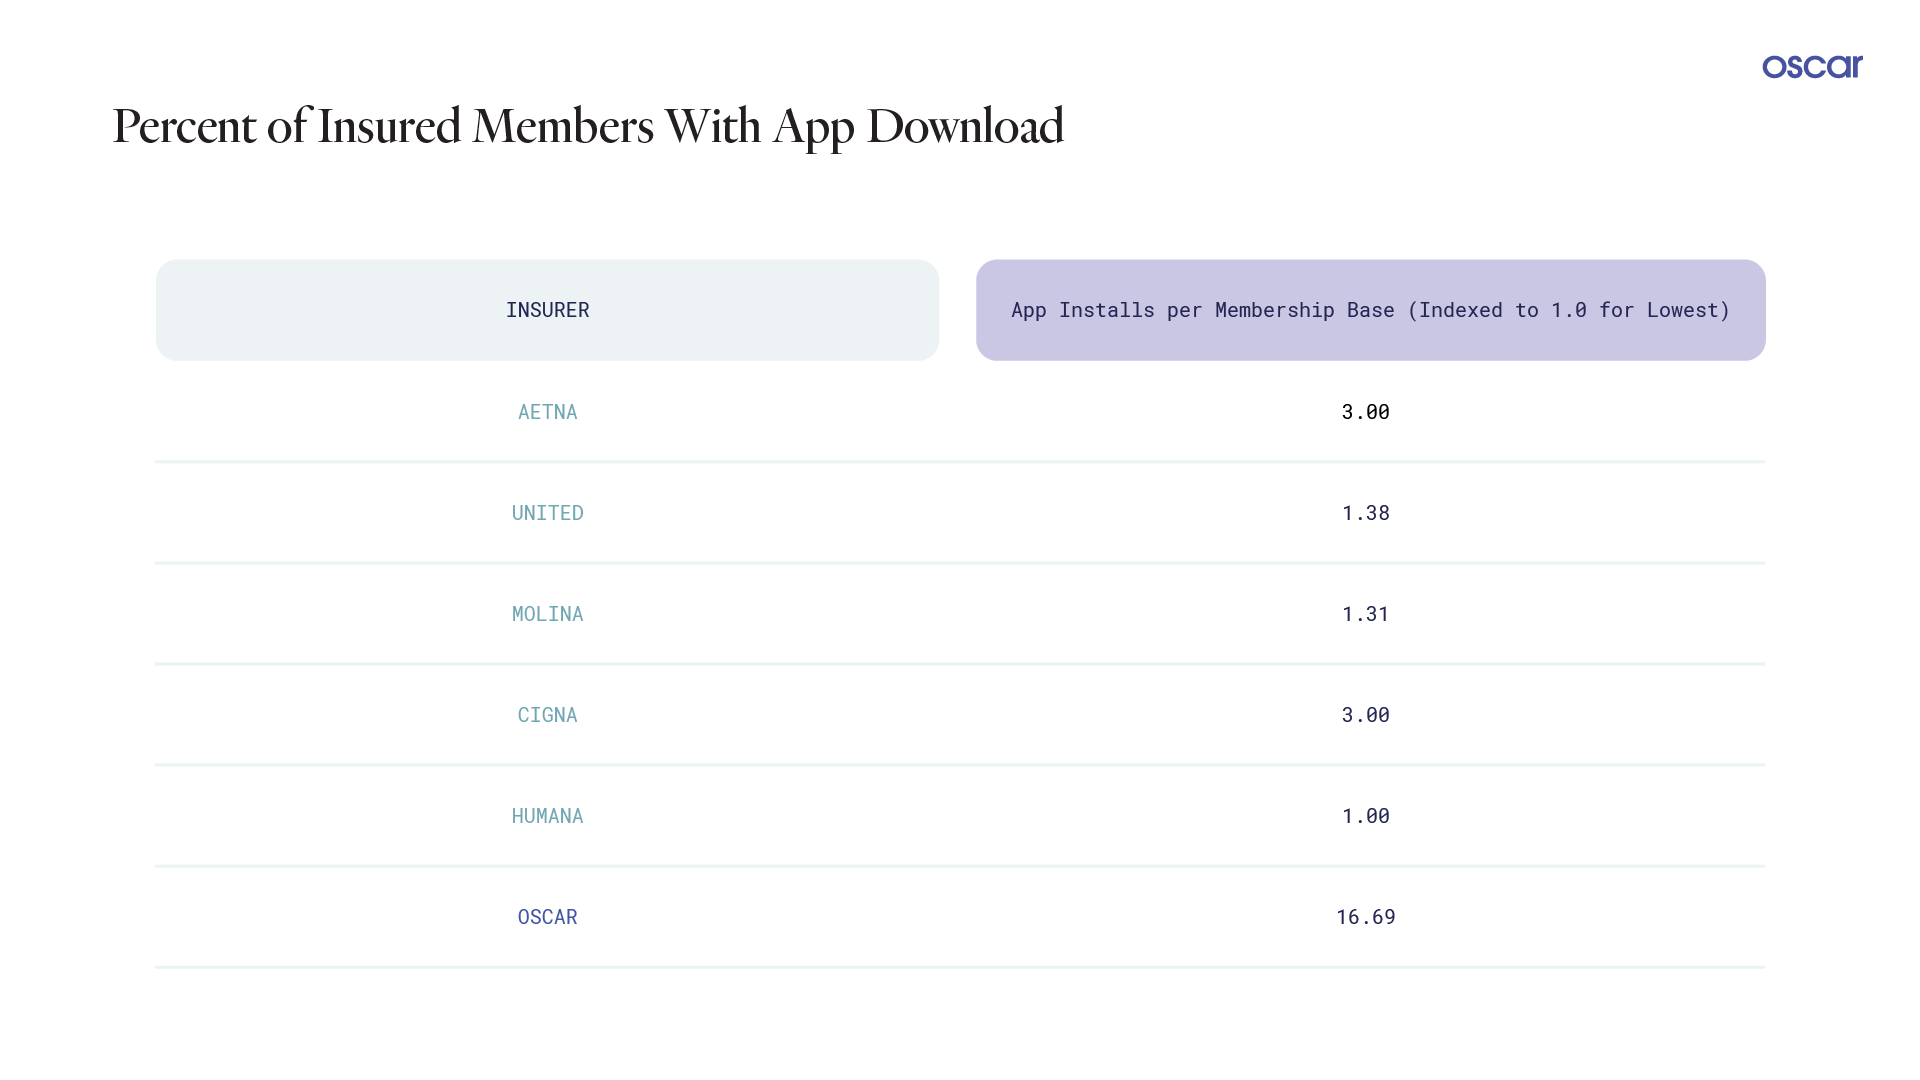 Mobile app download percentage of all insured members as of December 31, 2020. Image shows that Oscar has the highest app download compared to Aetna, United, Molina, Cigna, Humana. 

Source: App Annie 